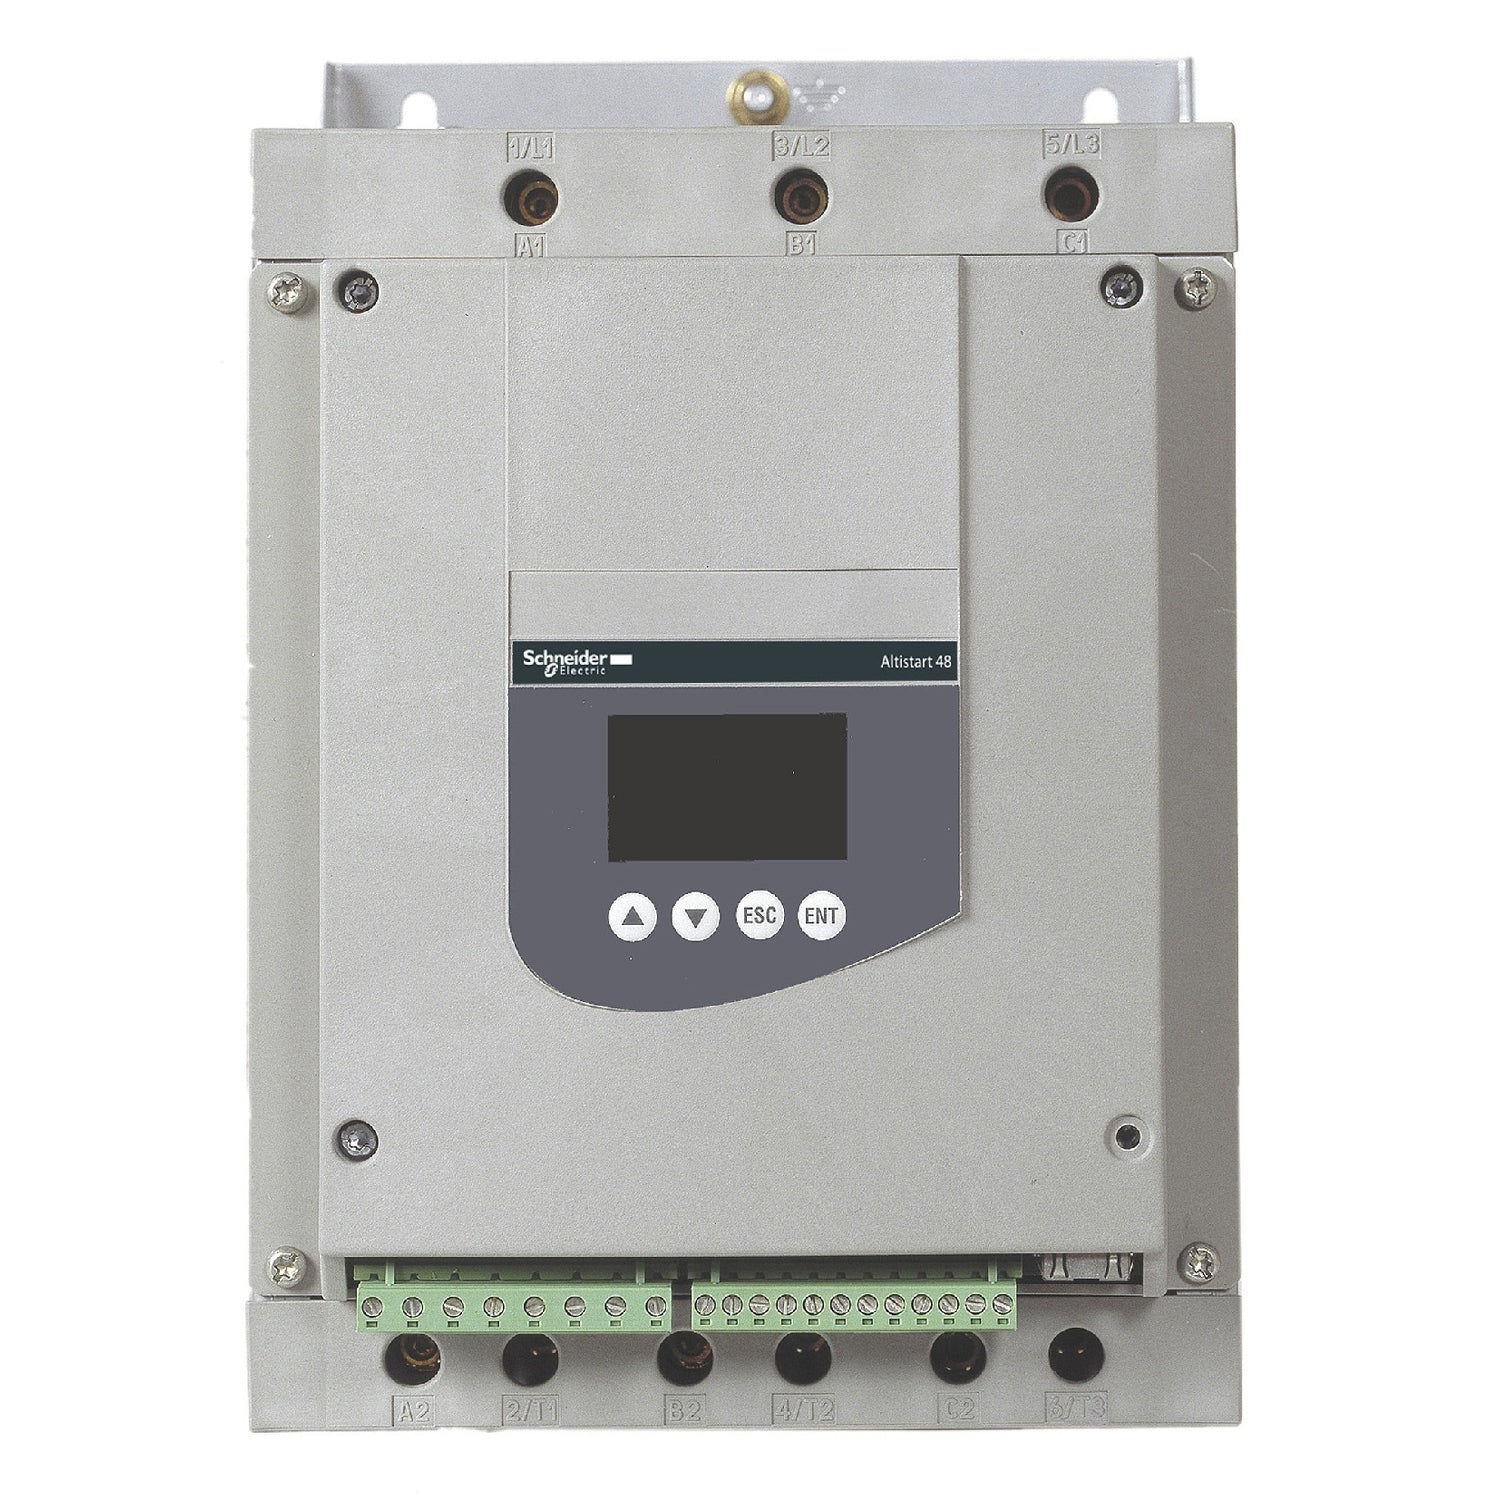 ATS48C11Y | Schneider Electric Soft starter for asynchronous motor